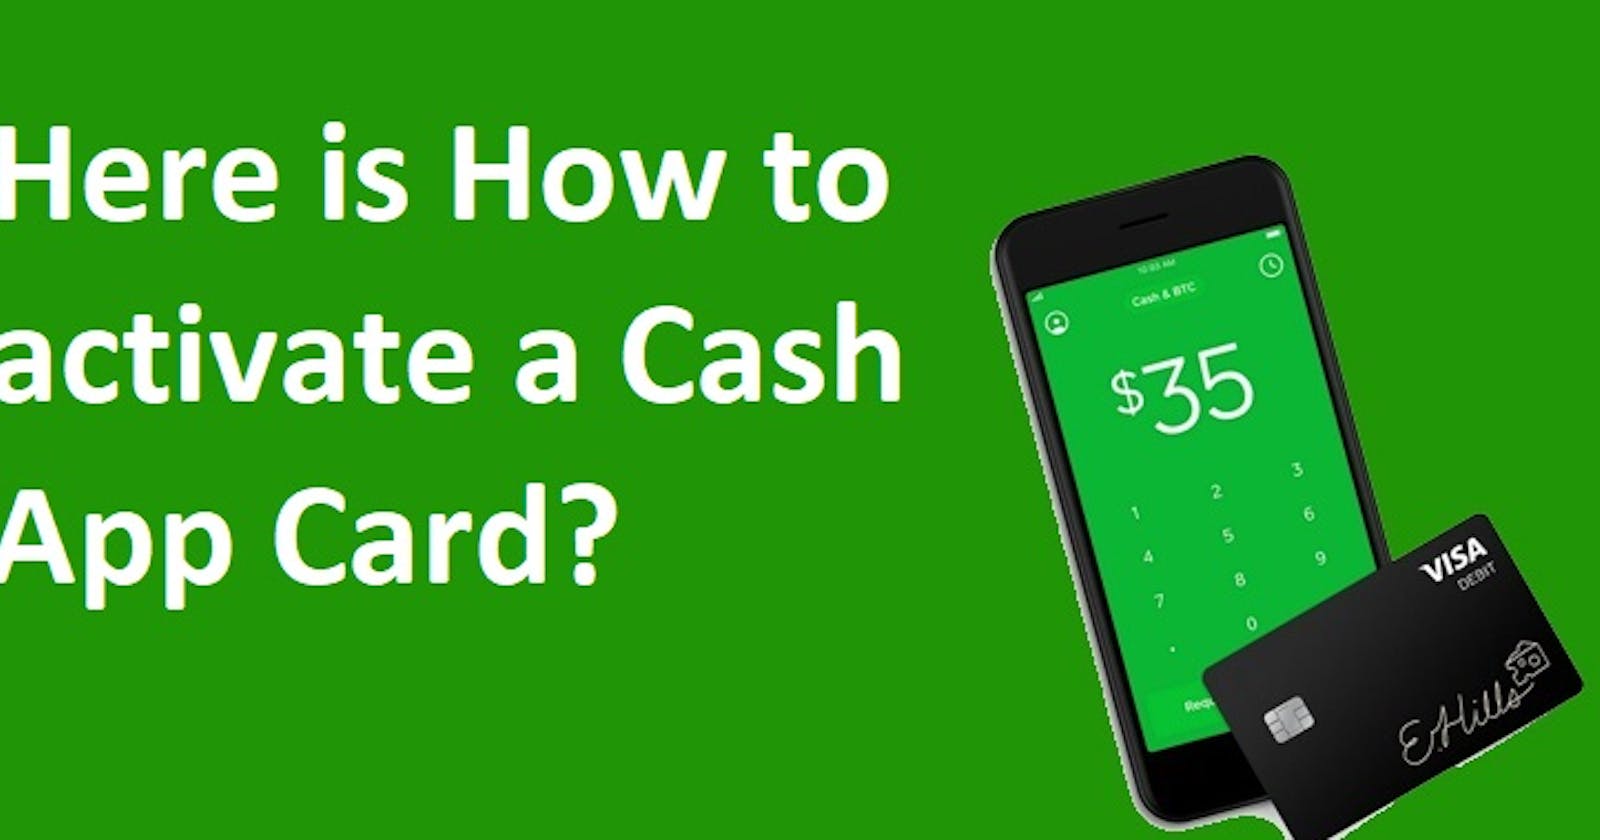 Here is How to activate a Cash App Card?